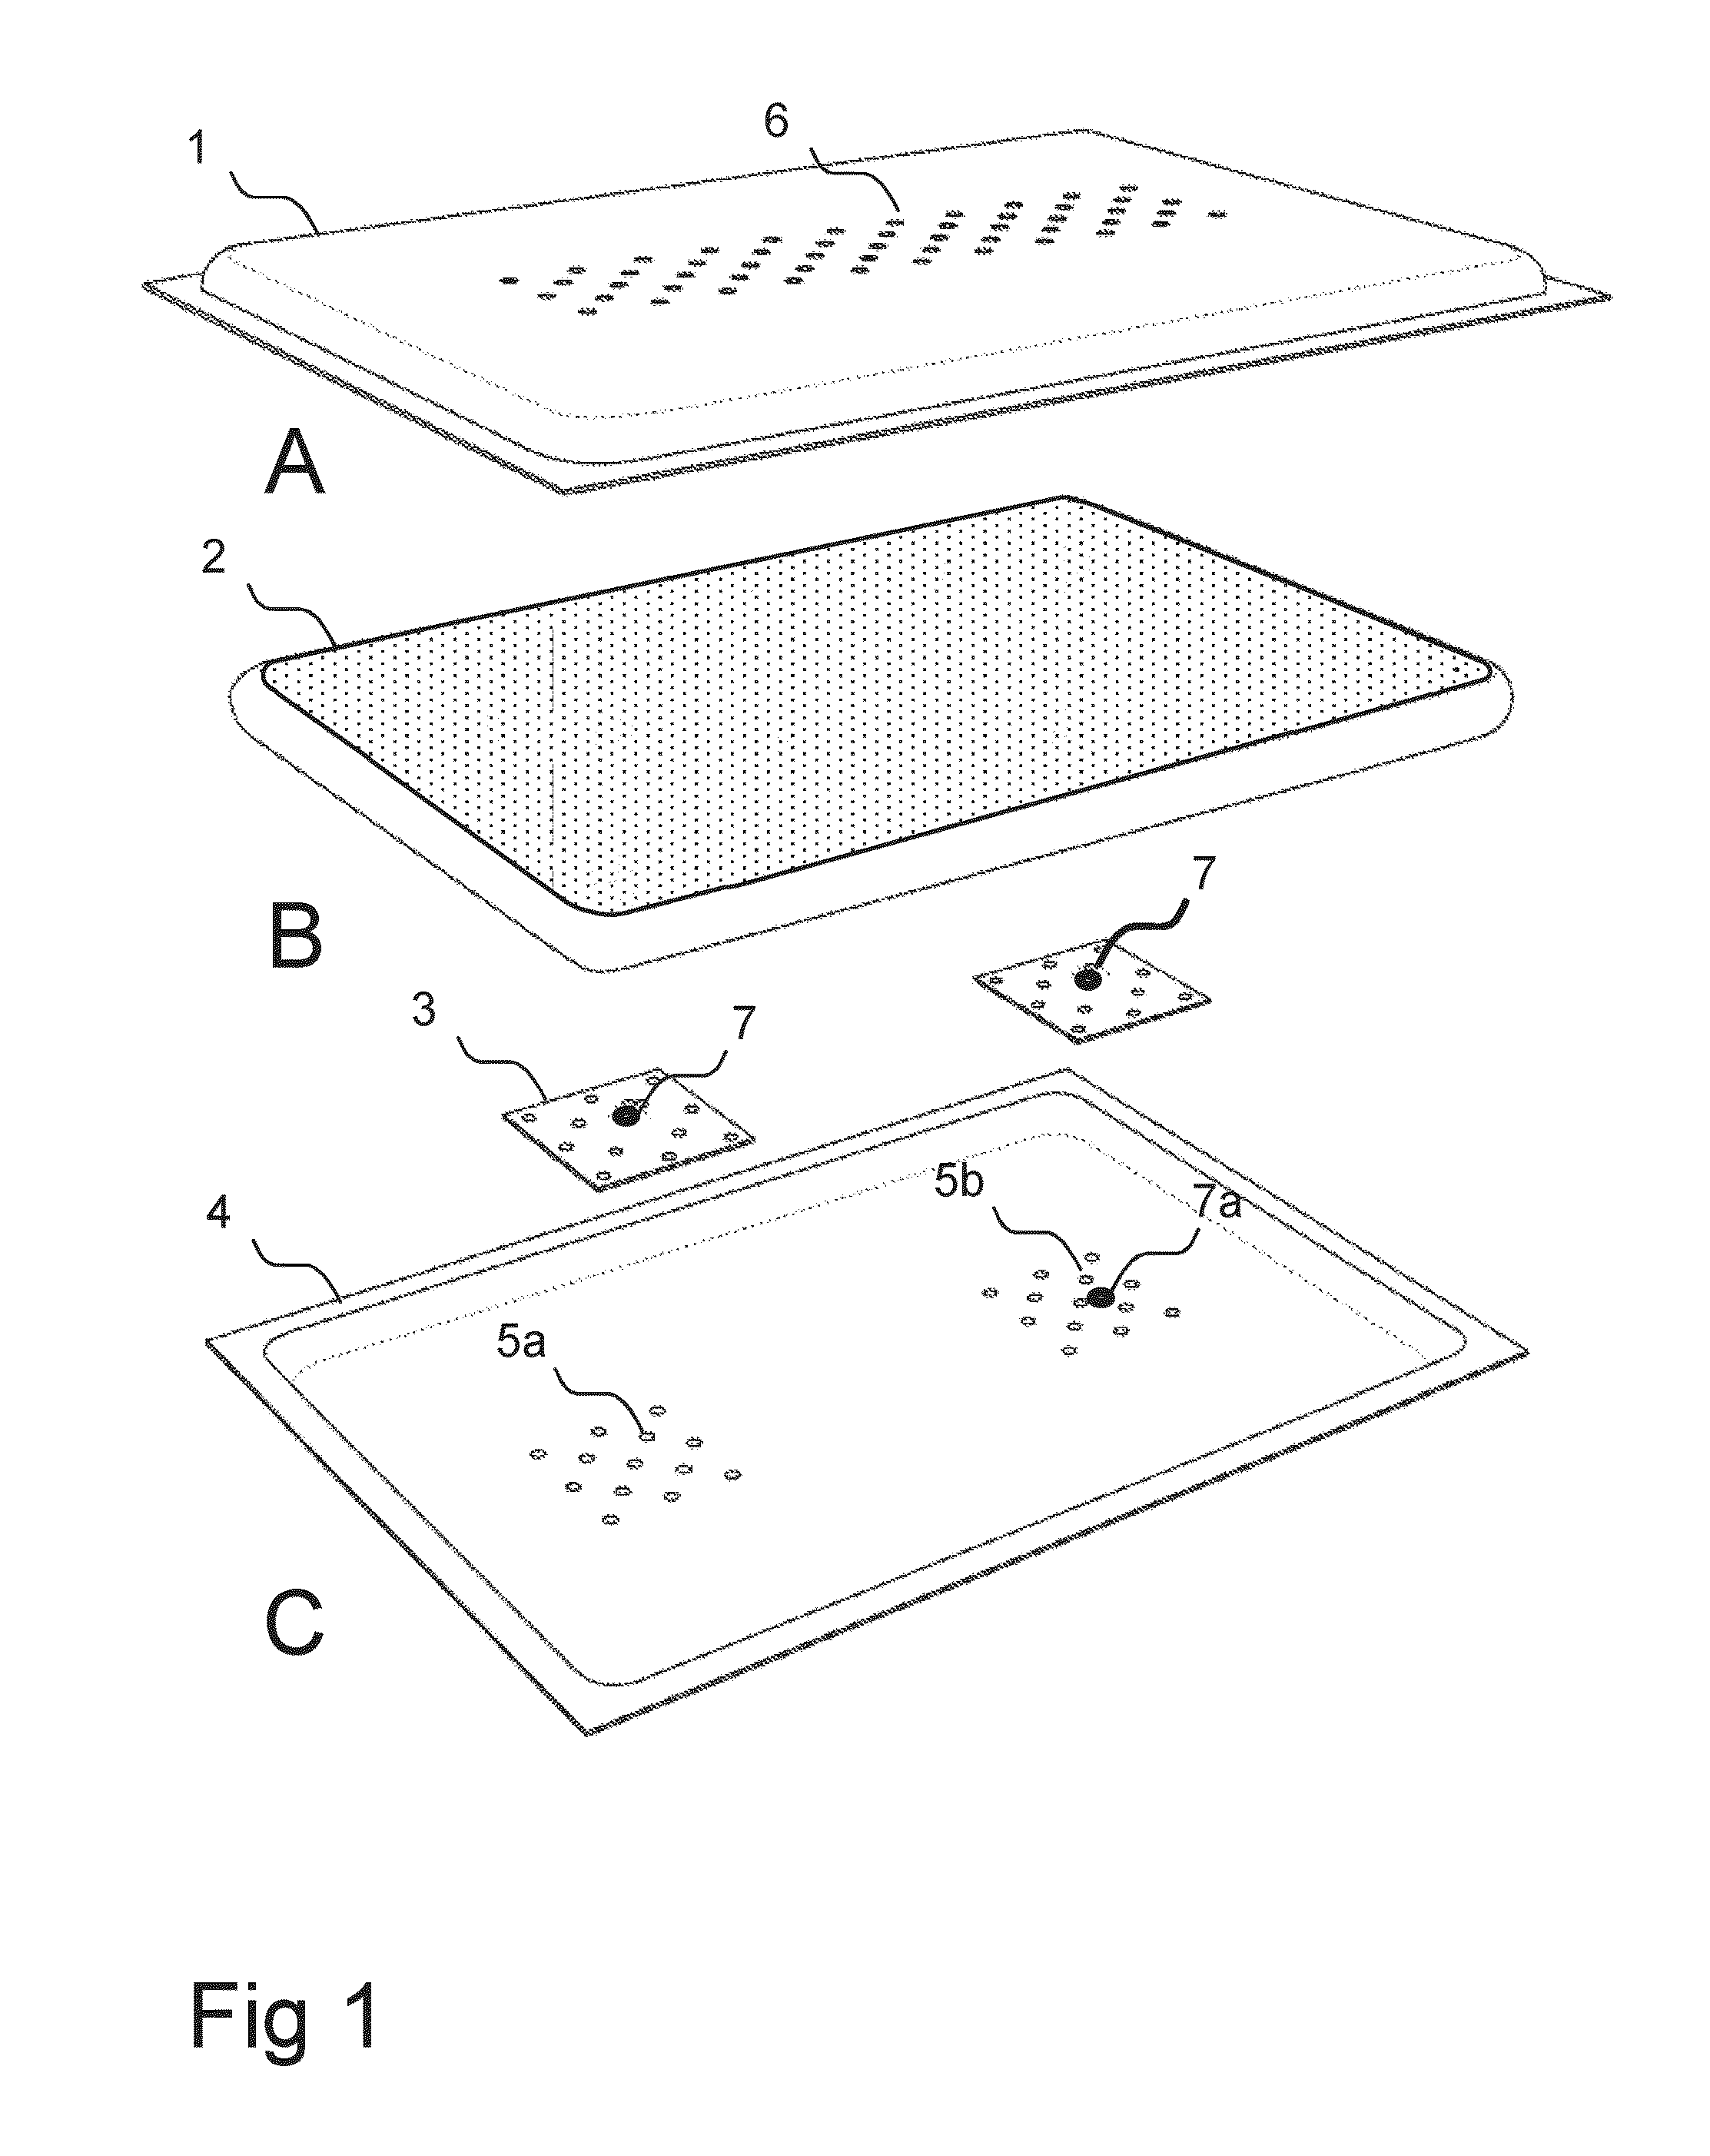 Sowing unit and uses thereof